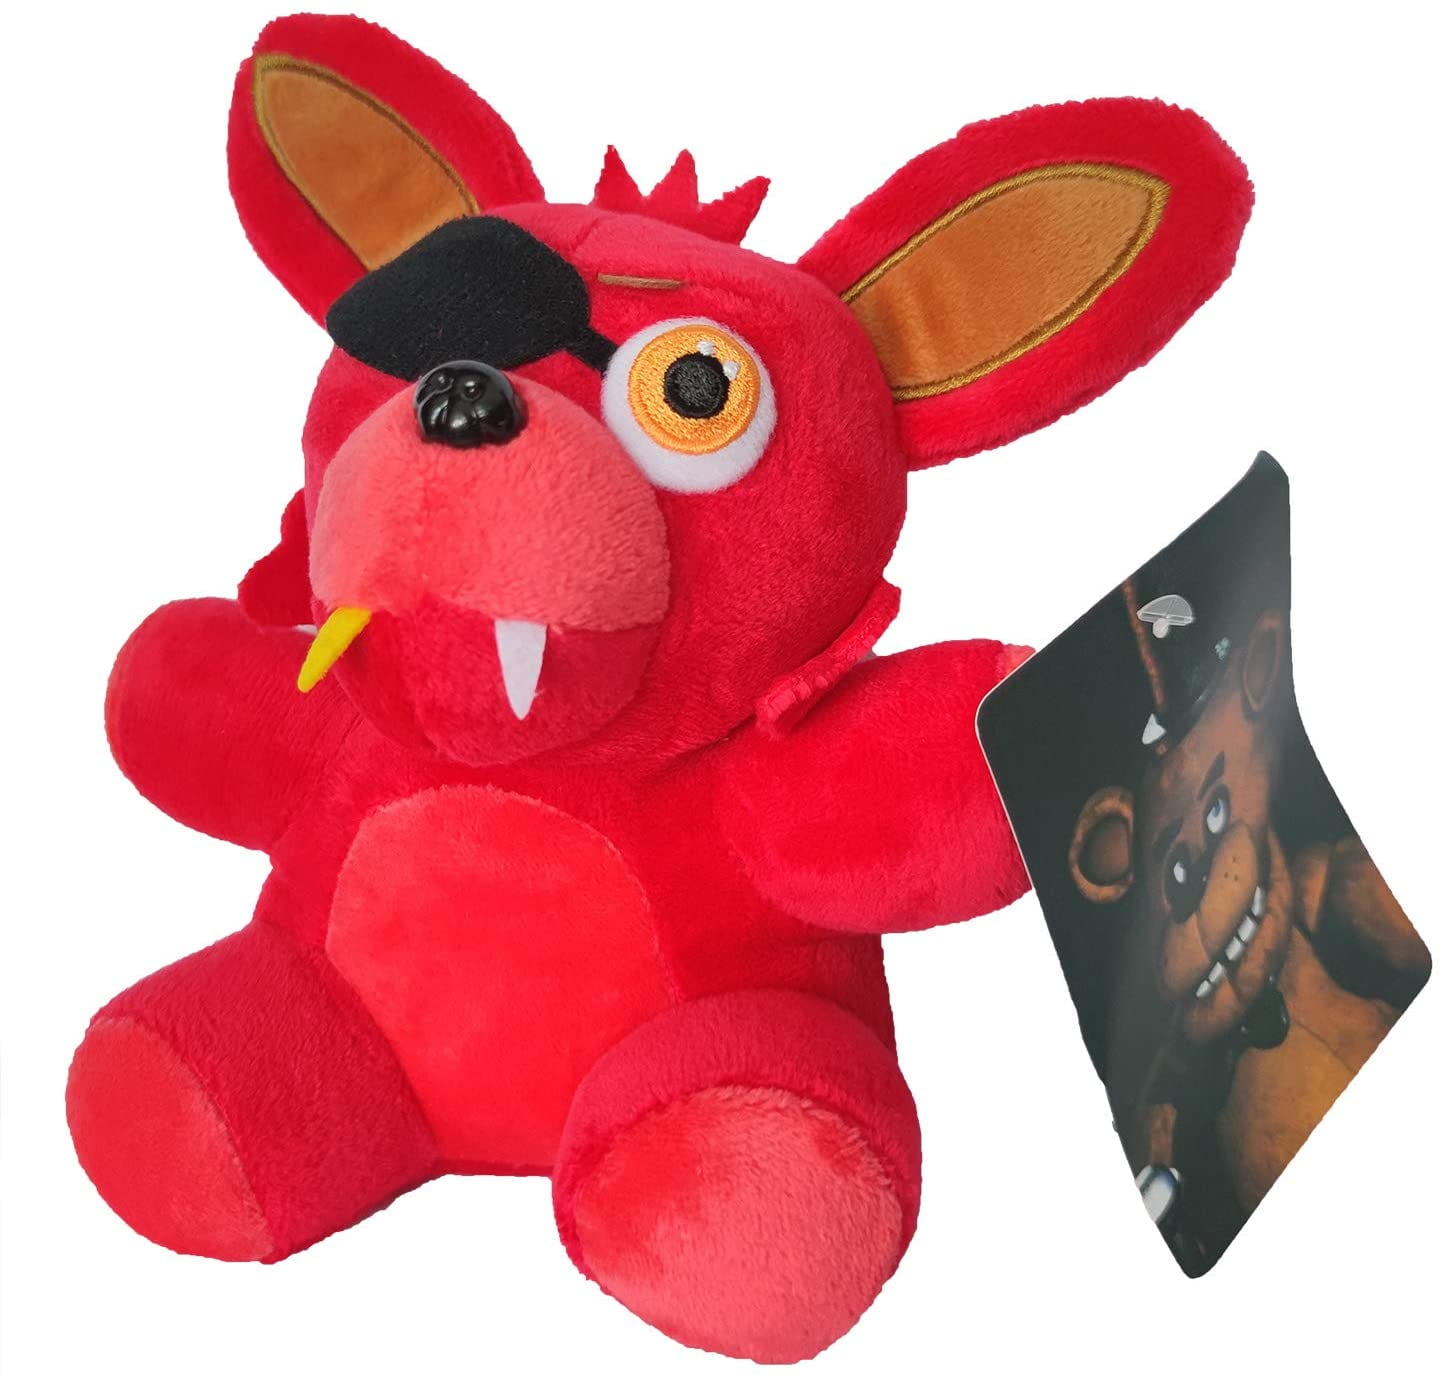 PLUSH FNAF SET OF  2 NEW FIVE NIGHTS AT FREDDY'S 7"  BABY & FOXY TOYS